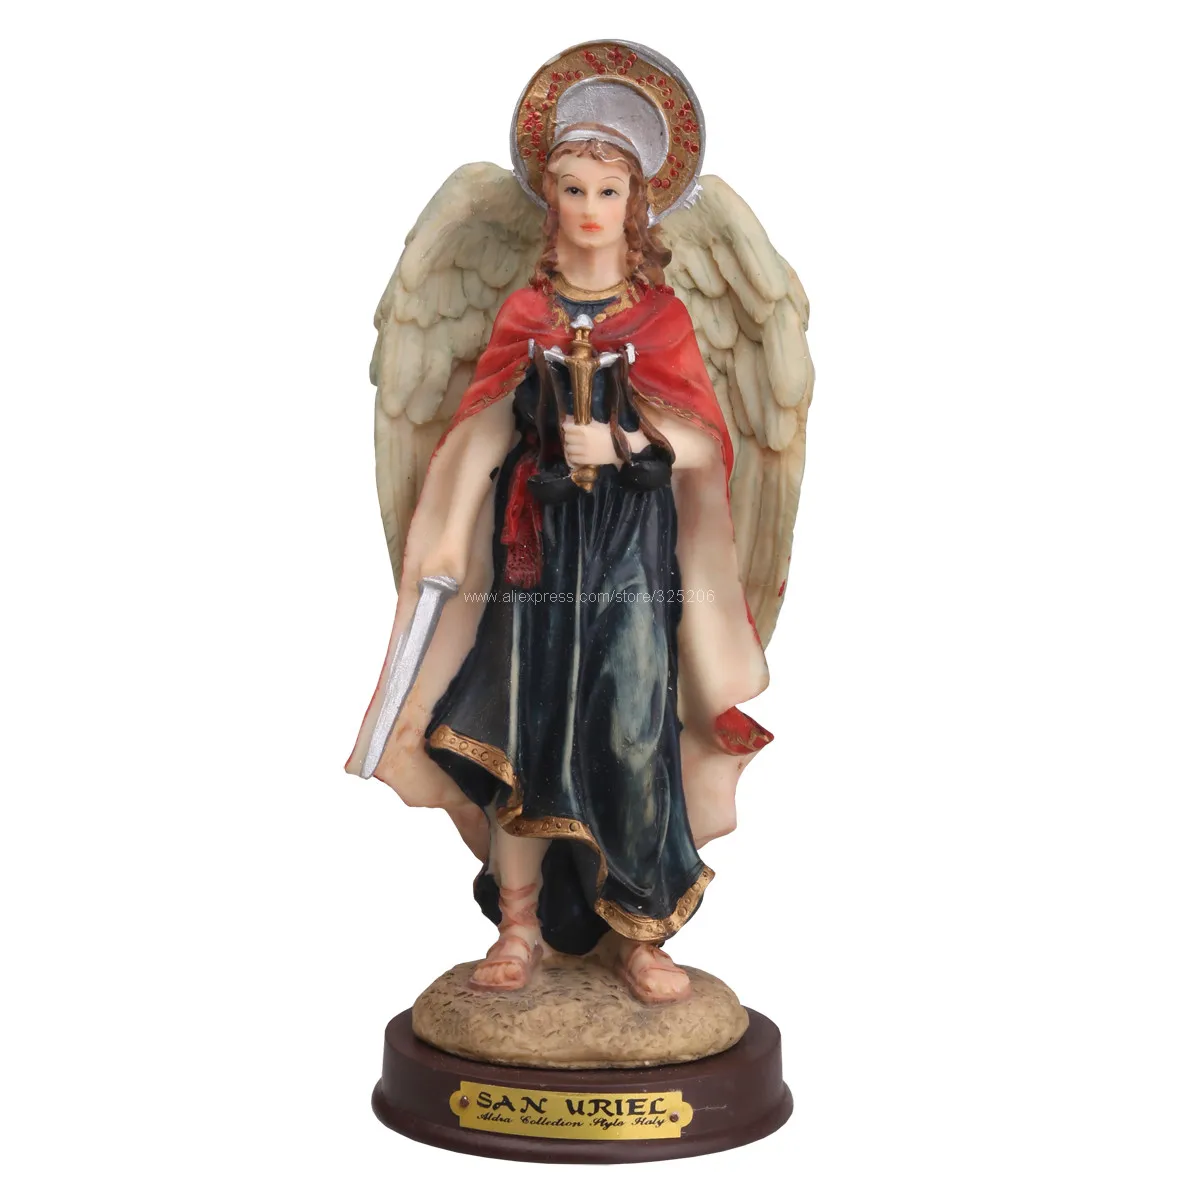 St. Archangel Michael Statue Holy Figurine Religious Catholic Decor for Home Church Decoration Souvenirs Gift 21cm 8.25inch NEW